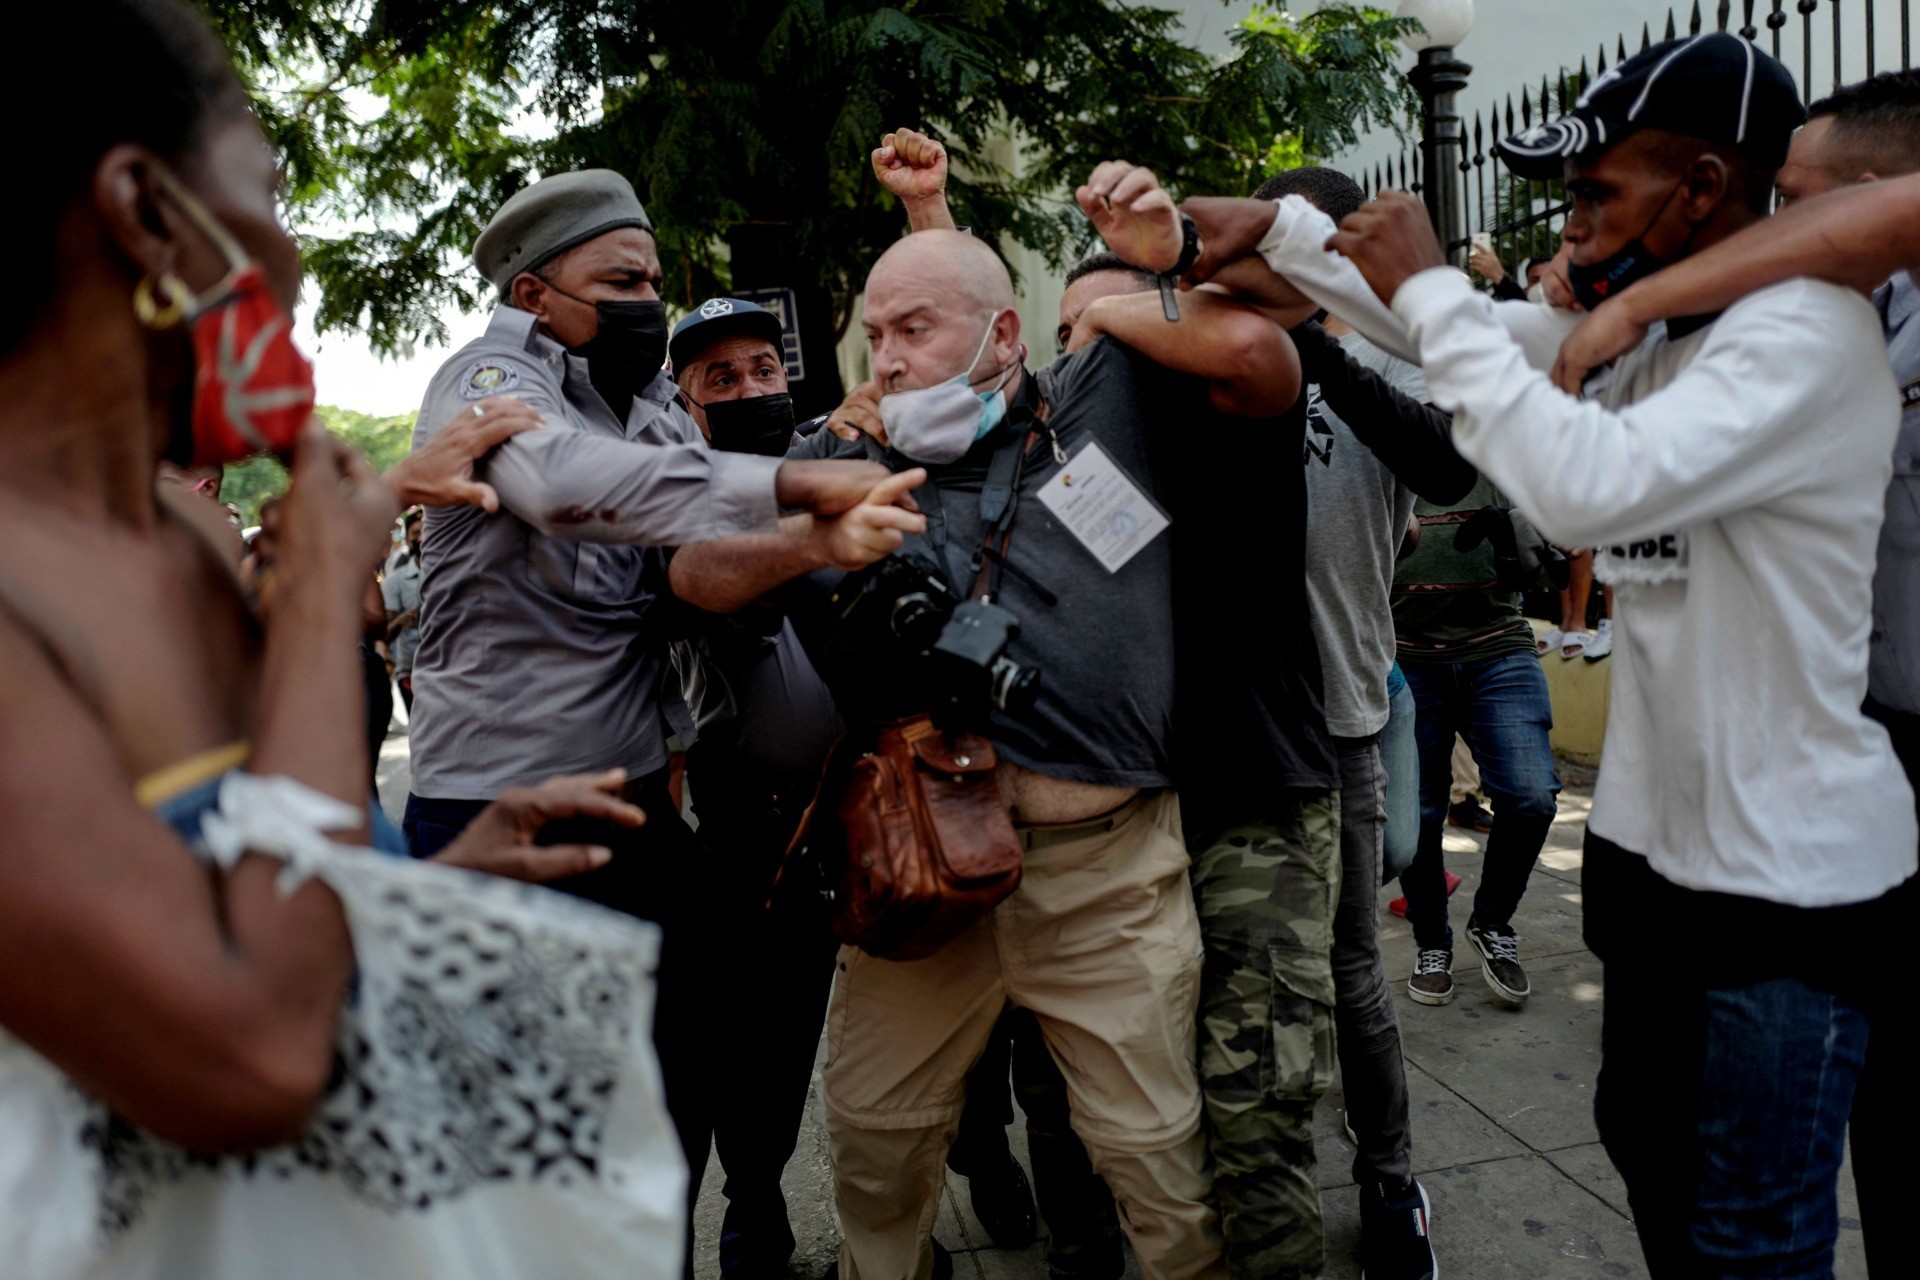 TOPSHOT - AP photographer, Spanish Ramon Espinosa, is attacked by the police while covering a demonstration against Cuban President Miguel Diaz-Canel in Havana, on July 11, 2021. - Thousands of Cubans took part in rare protests Sunday against the communist government, marching through a town chanting "Down with the dictatorship" and "We want liberty." (Photo by Adalberto ROQUE / AFP) (Photo by ADALBERTO ROQUE/AFP via Getty Images)